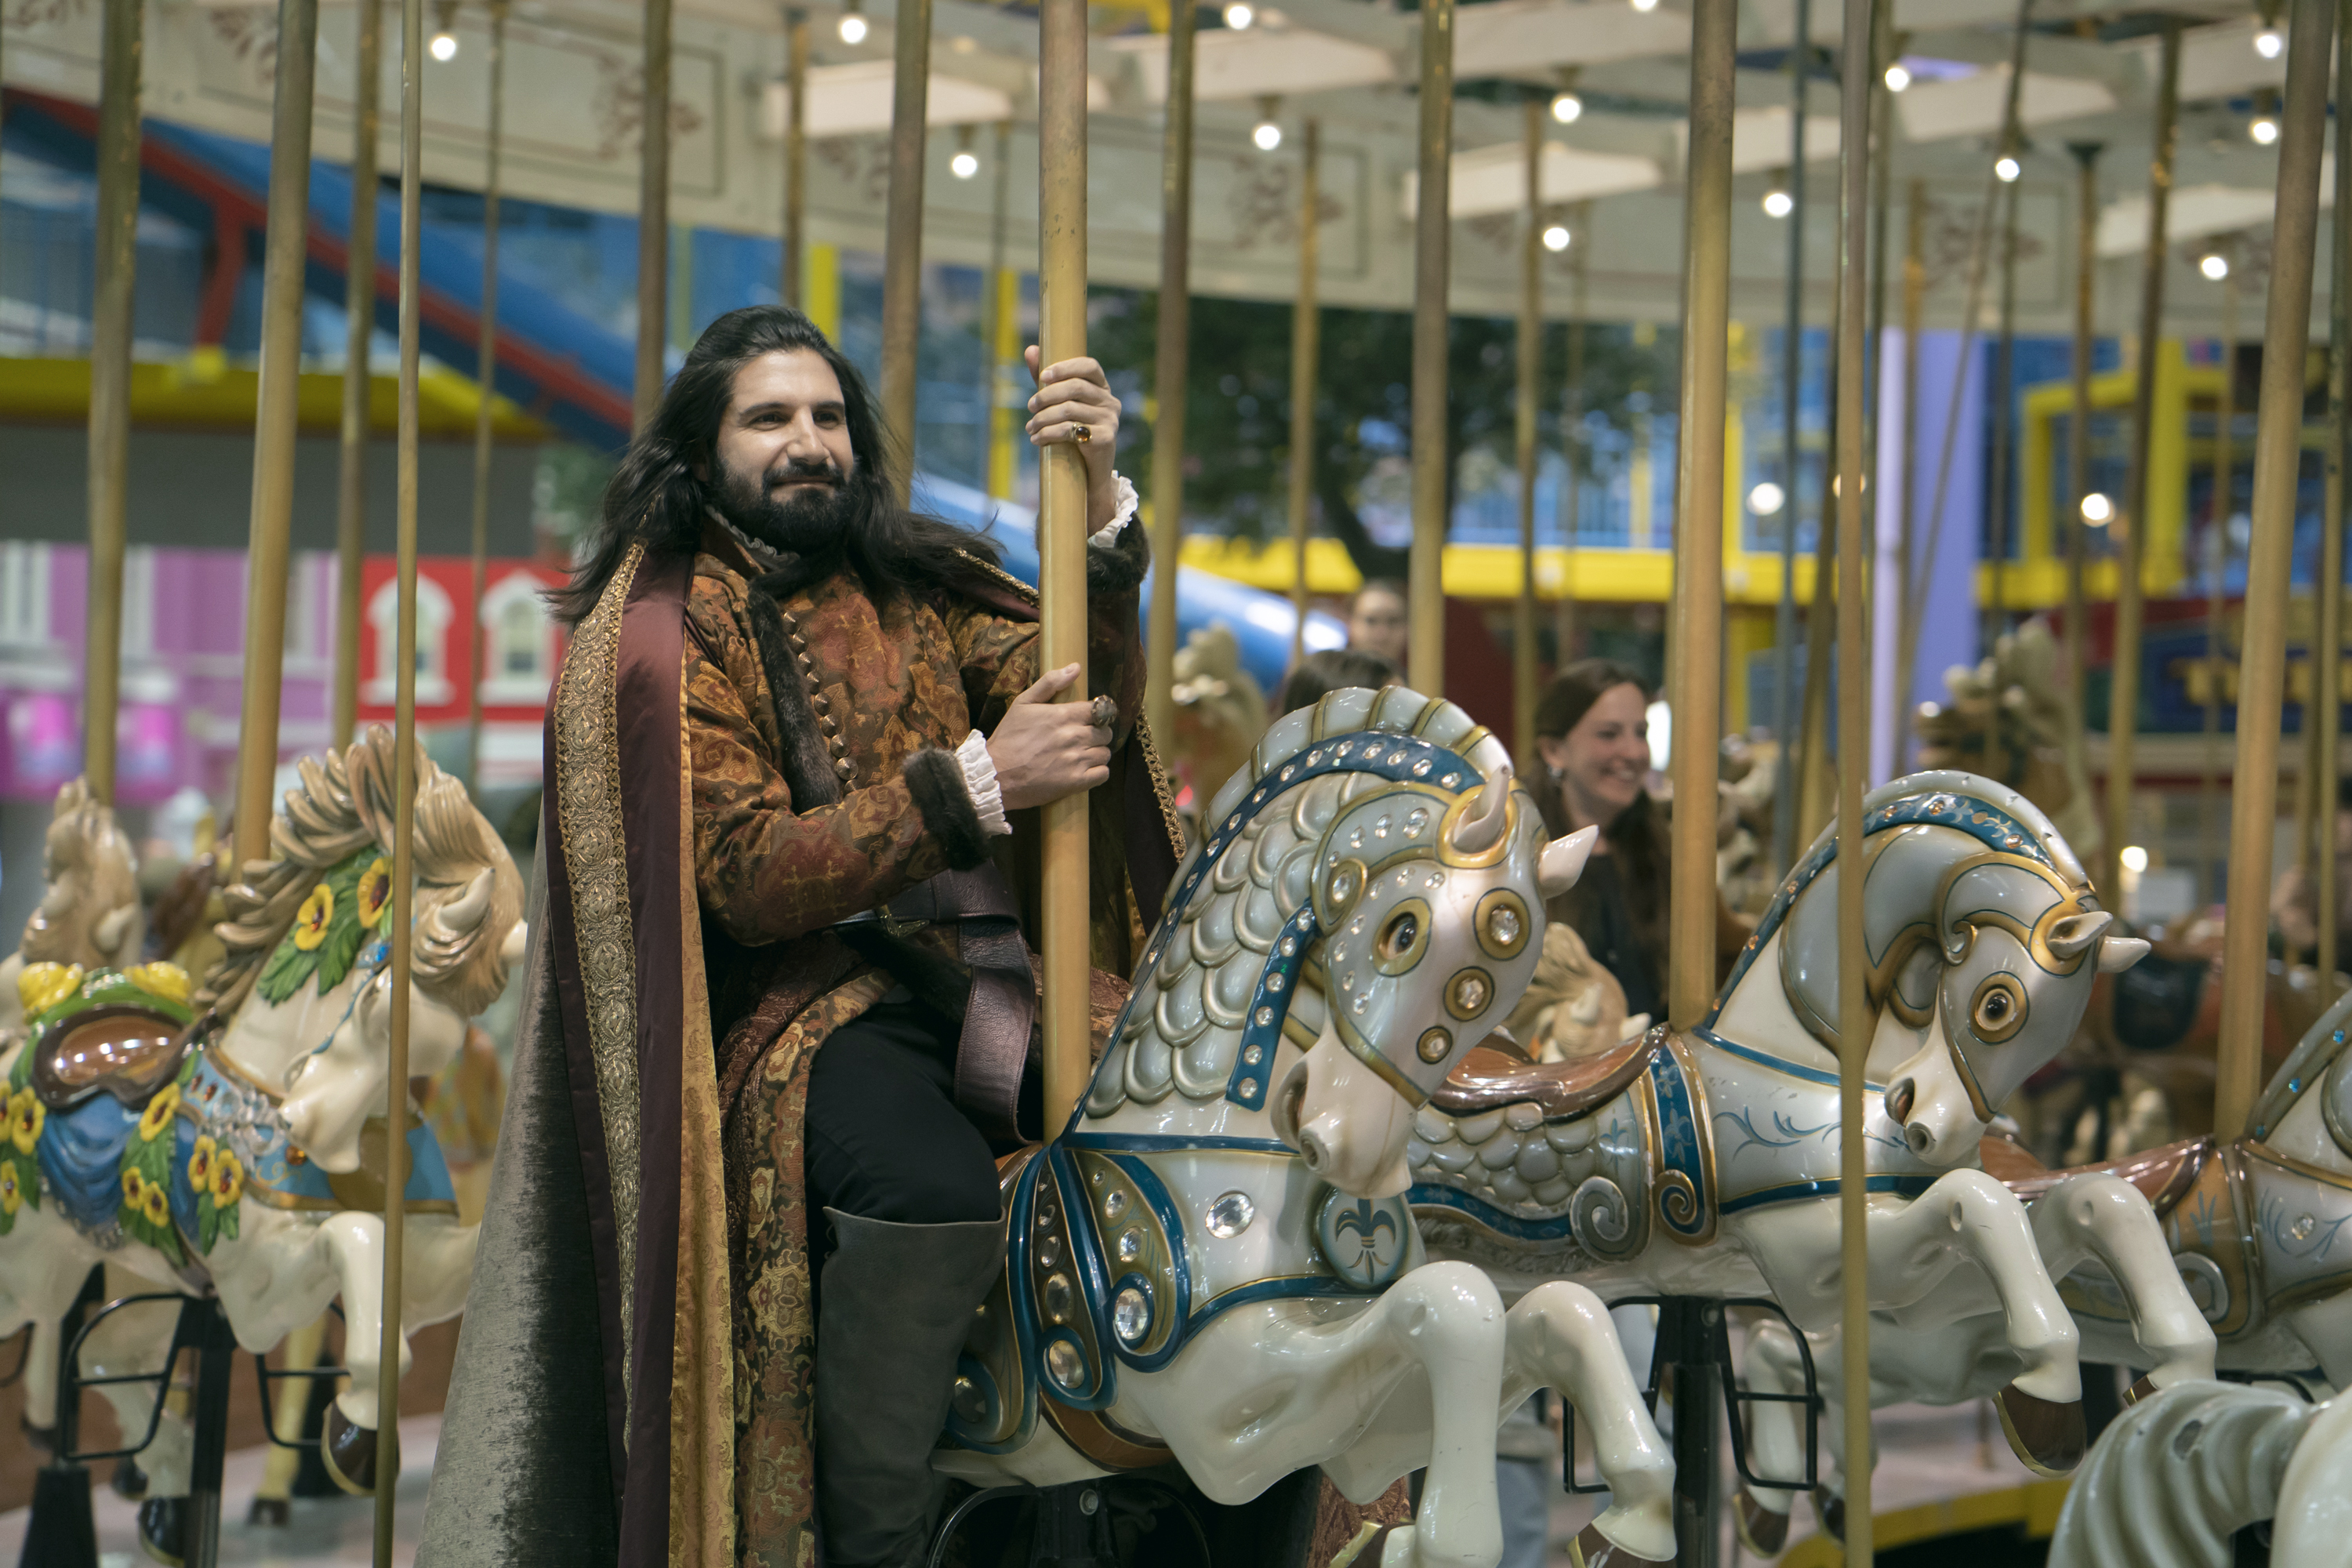 Nandor the Relentless rides a merry-go-round in What We Do in the Shadows season 5